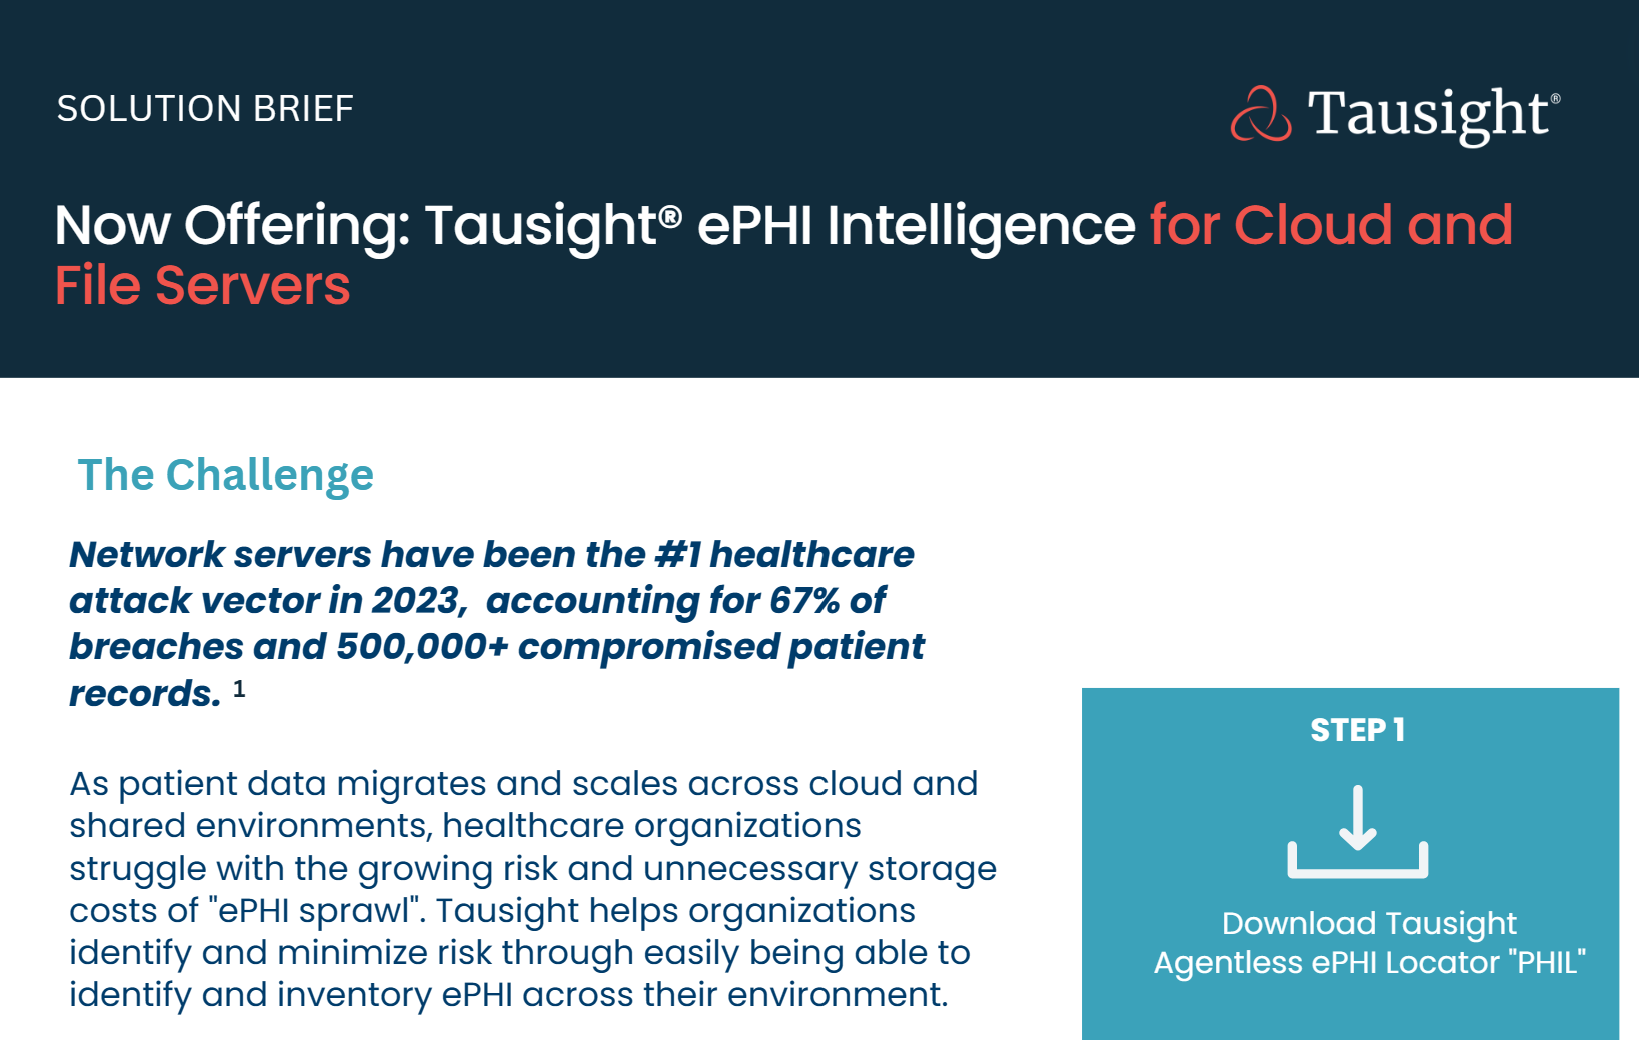 Tausight® ePHI Intelligence for Cloud and File Servers – Solution Brief